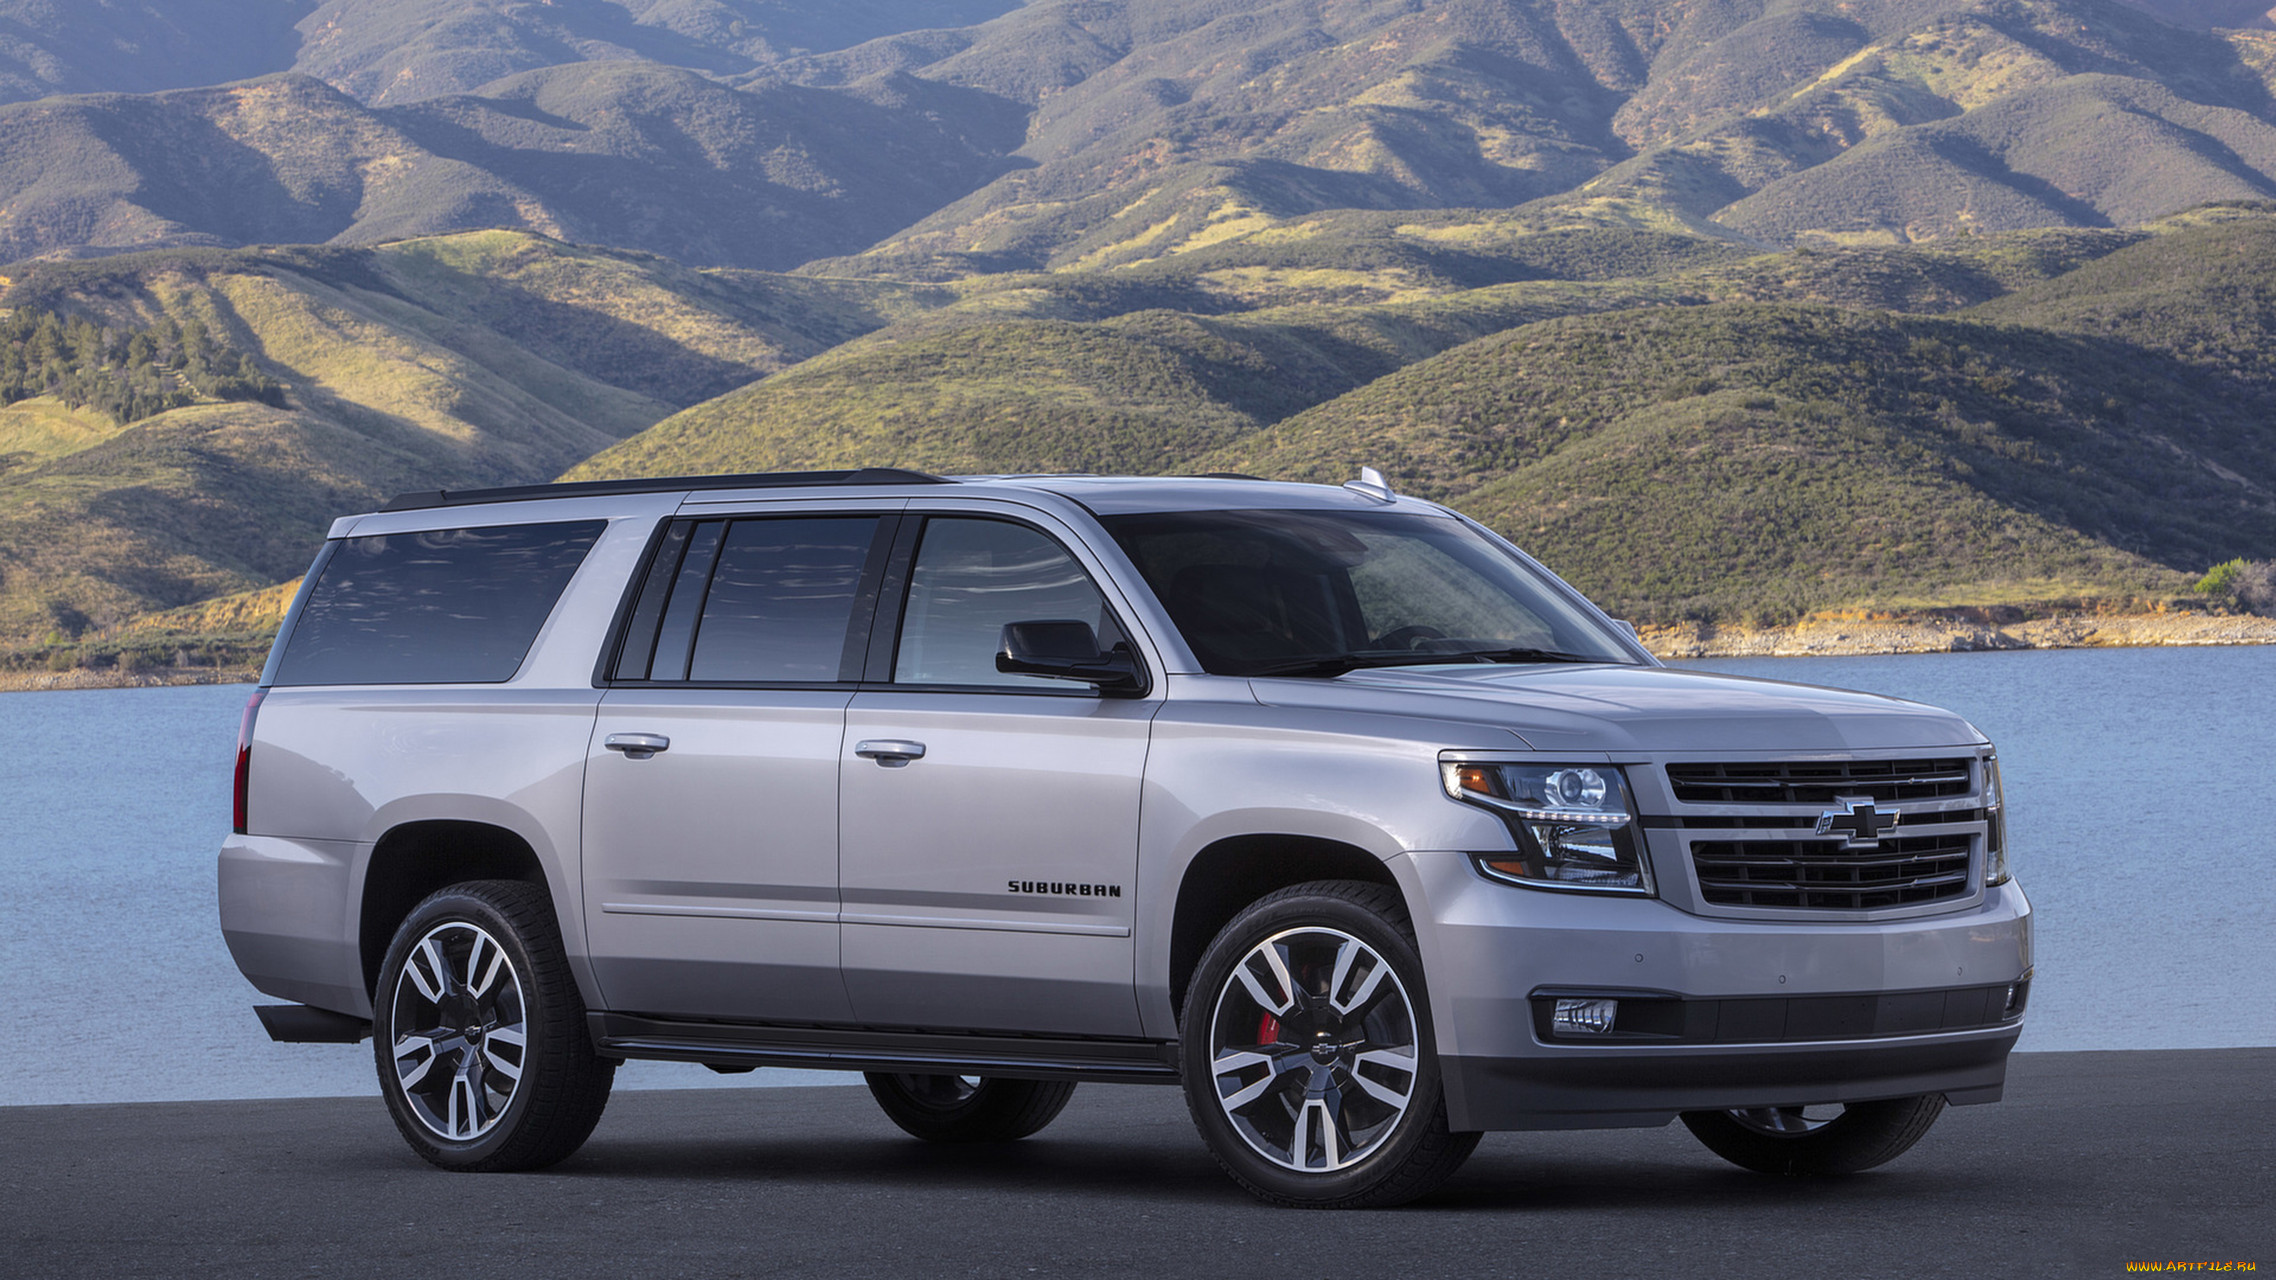 chevrolet suburban rst performance package 2019, , chevrolet, suburban, rst, performance, package, 2019